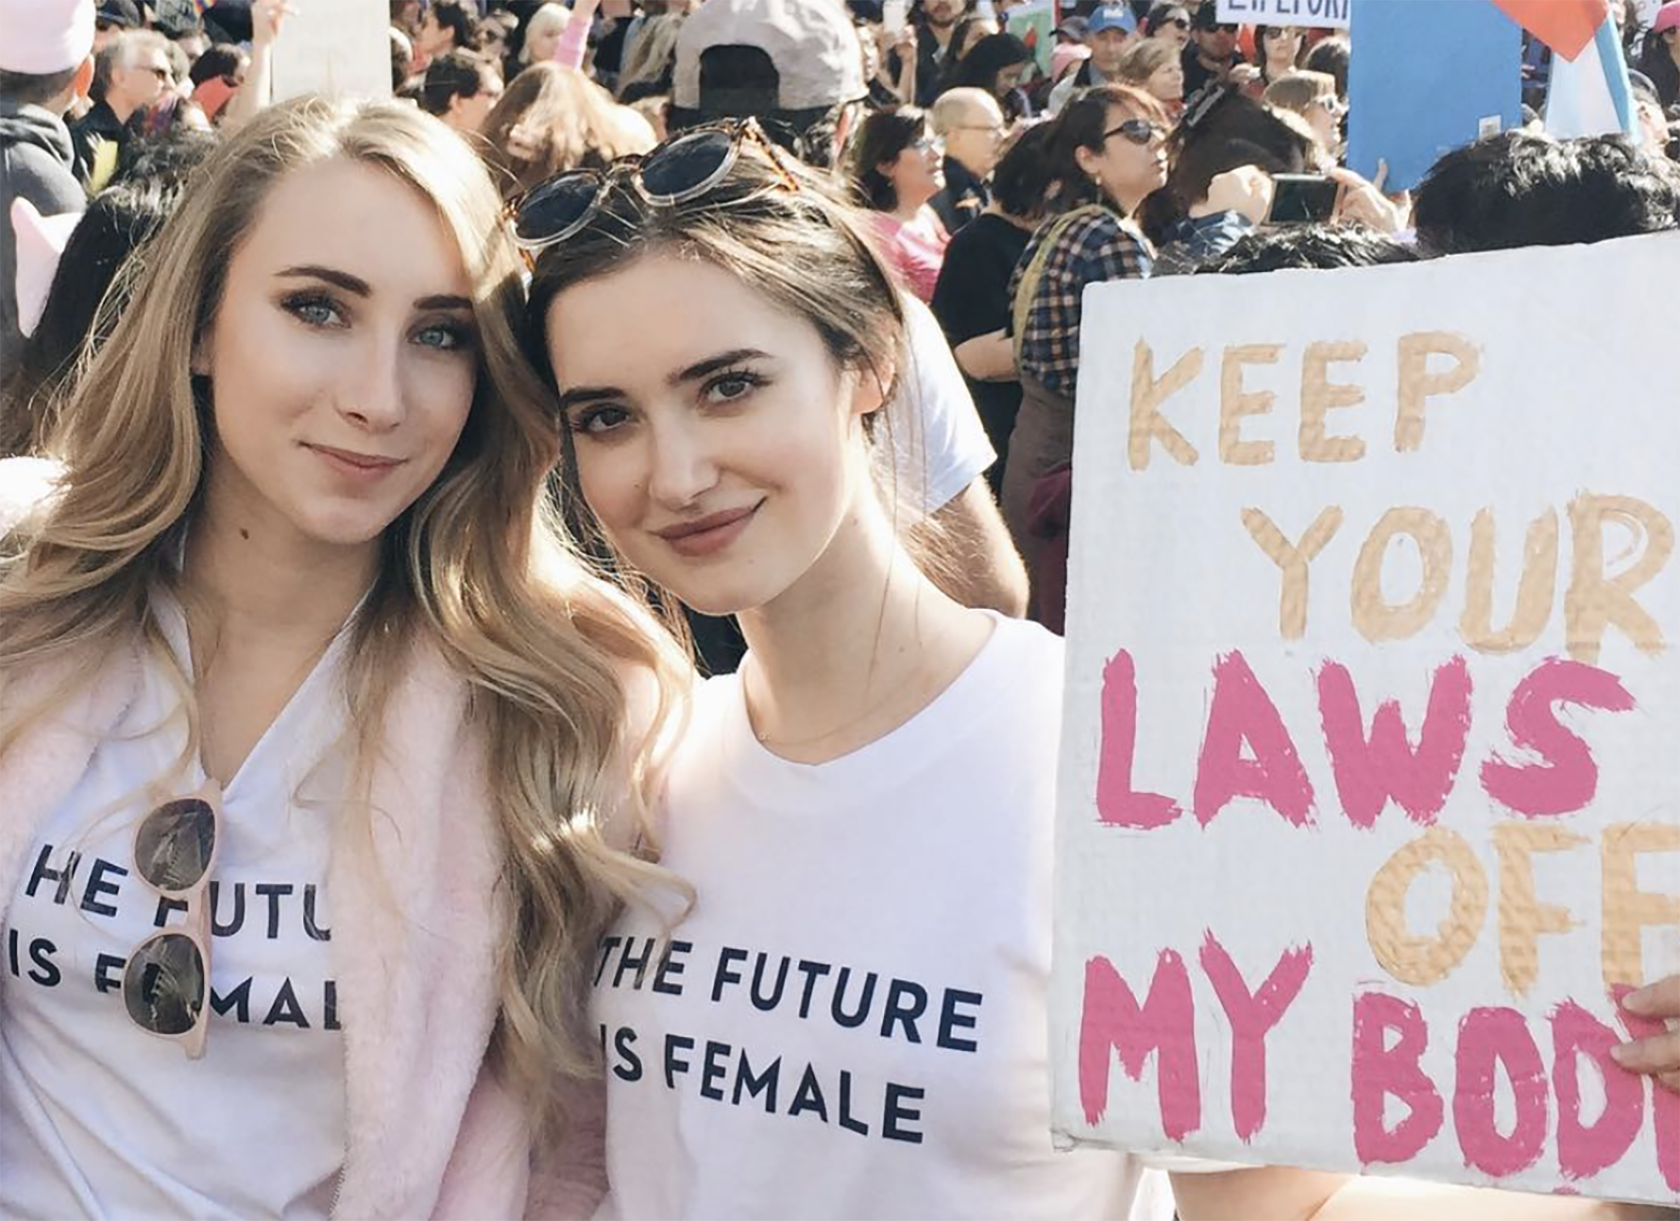 Two young white women at a protest posing with a sign that says 'Keep your laws off my body.'